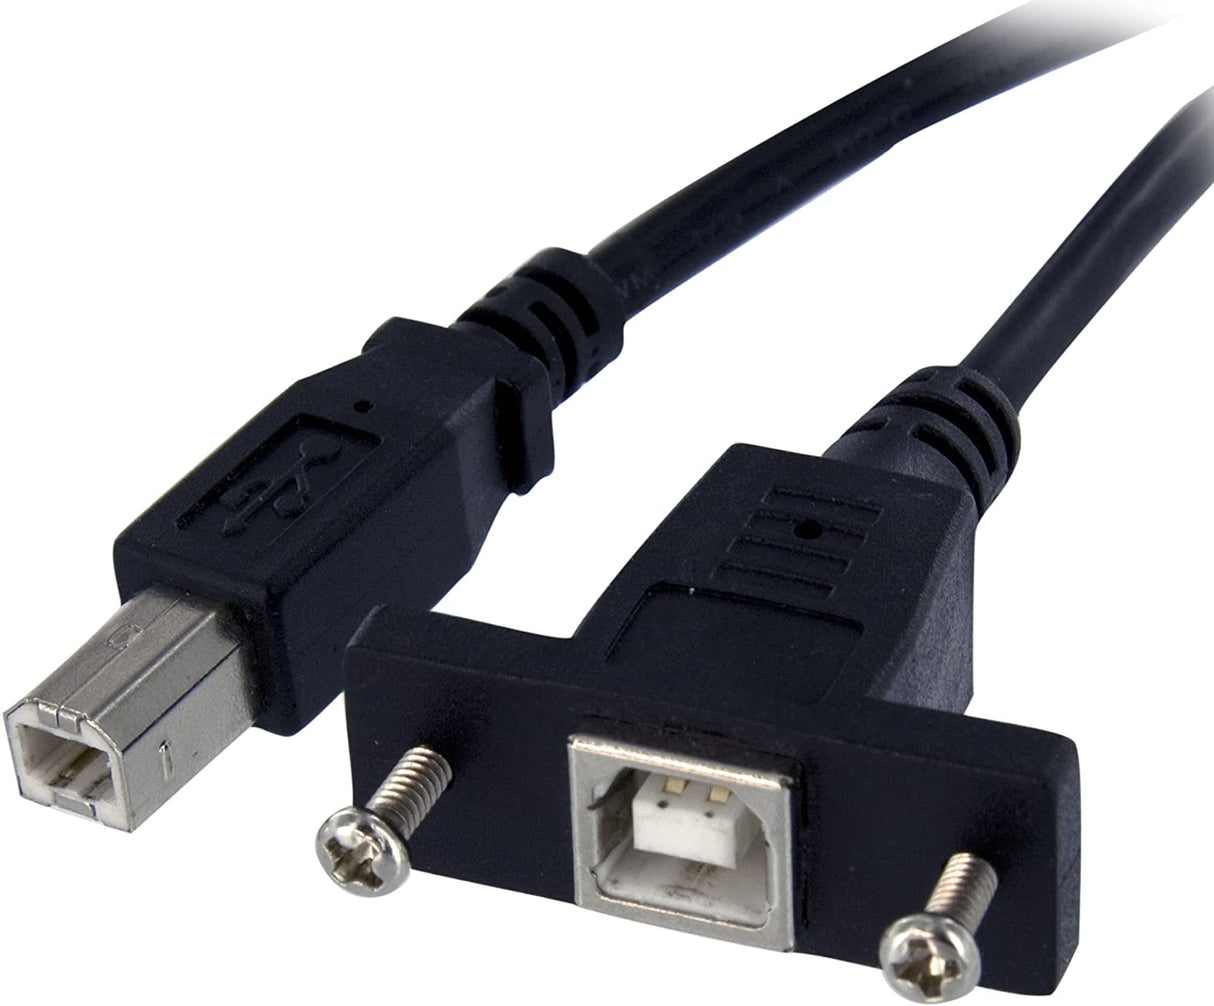 StarTech.com 3 ft Panel Mount USB Cable B to B - F/M - Panel Mount USB Extension USB-B Female to USB-B Male Adapter Cable - USB-B (F) Port (USBPNLBFBM3)